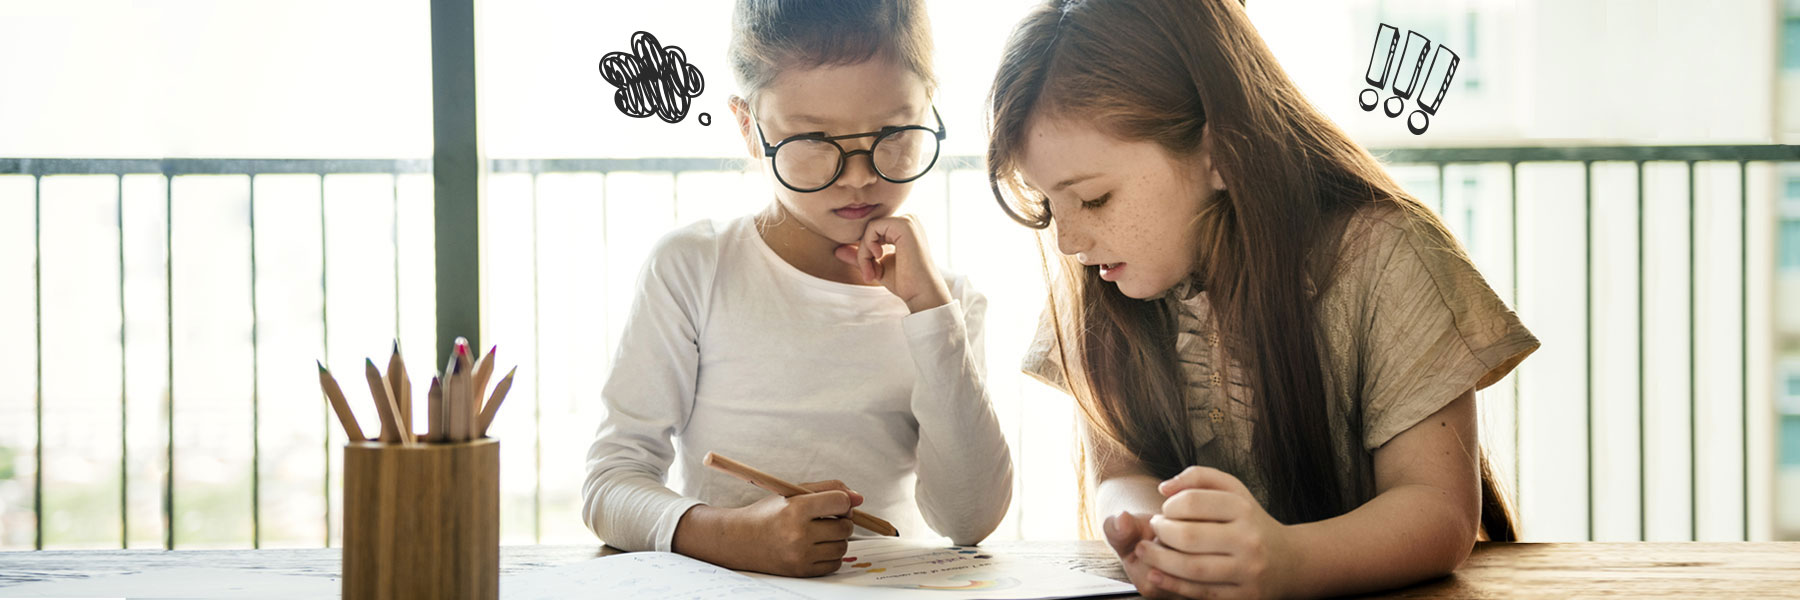 Two young girls sitting together at table with pencils looking at a specific piece of paper with serious thinking expressions on the faces. 